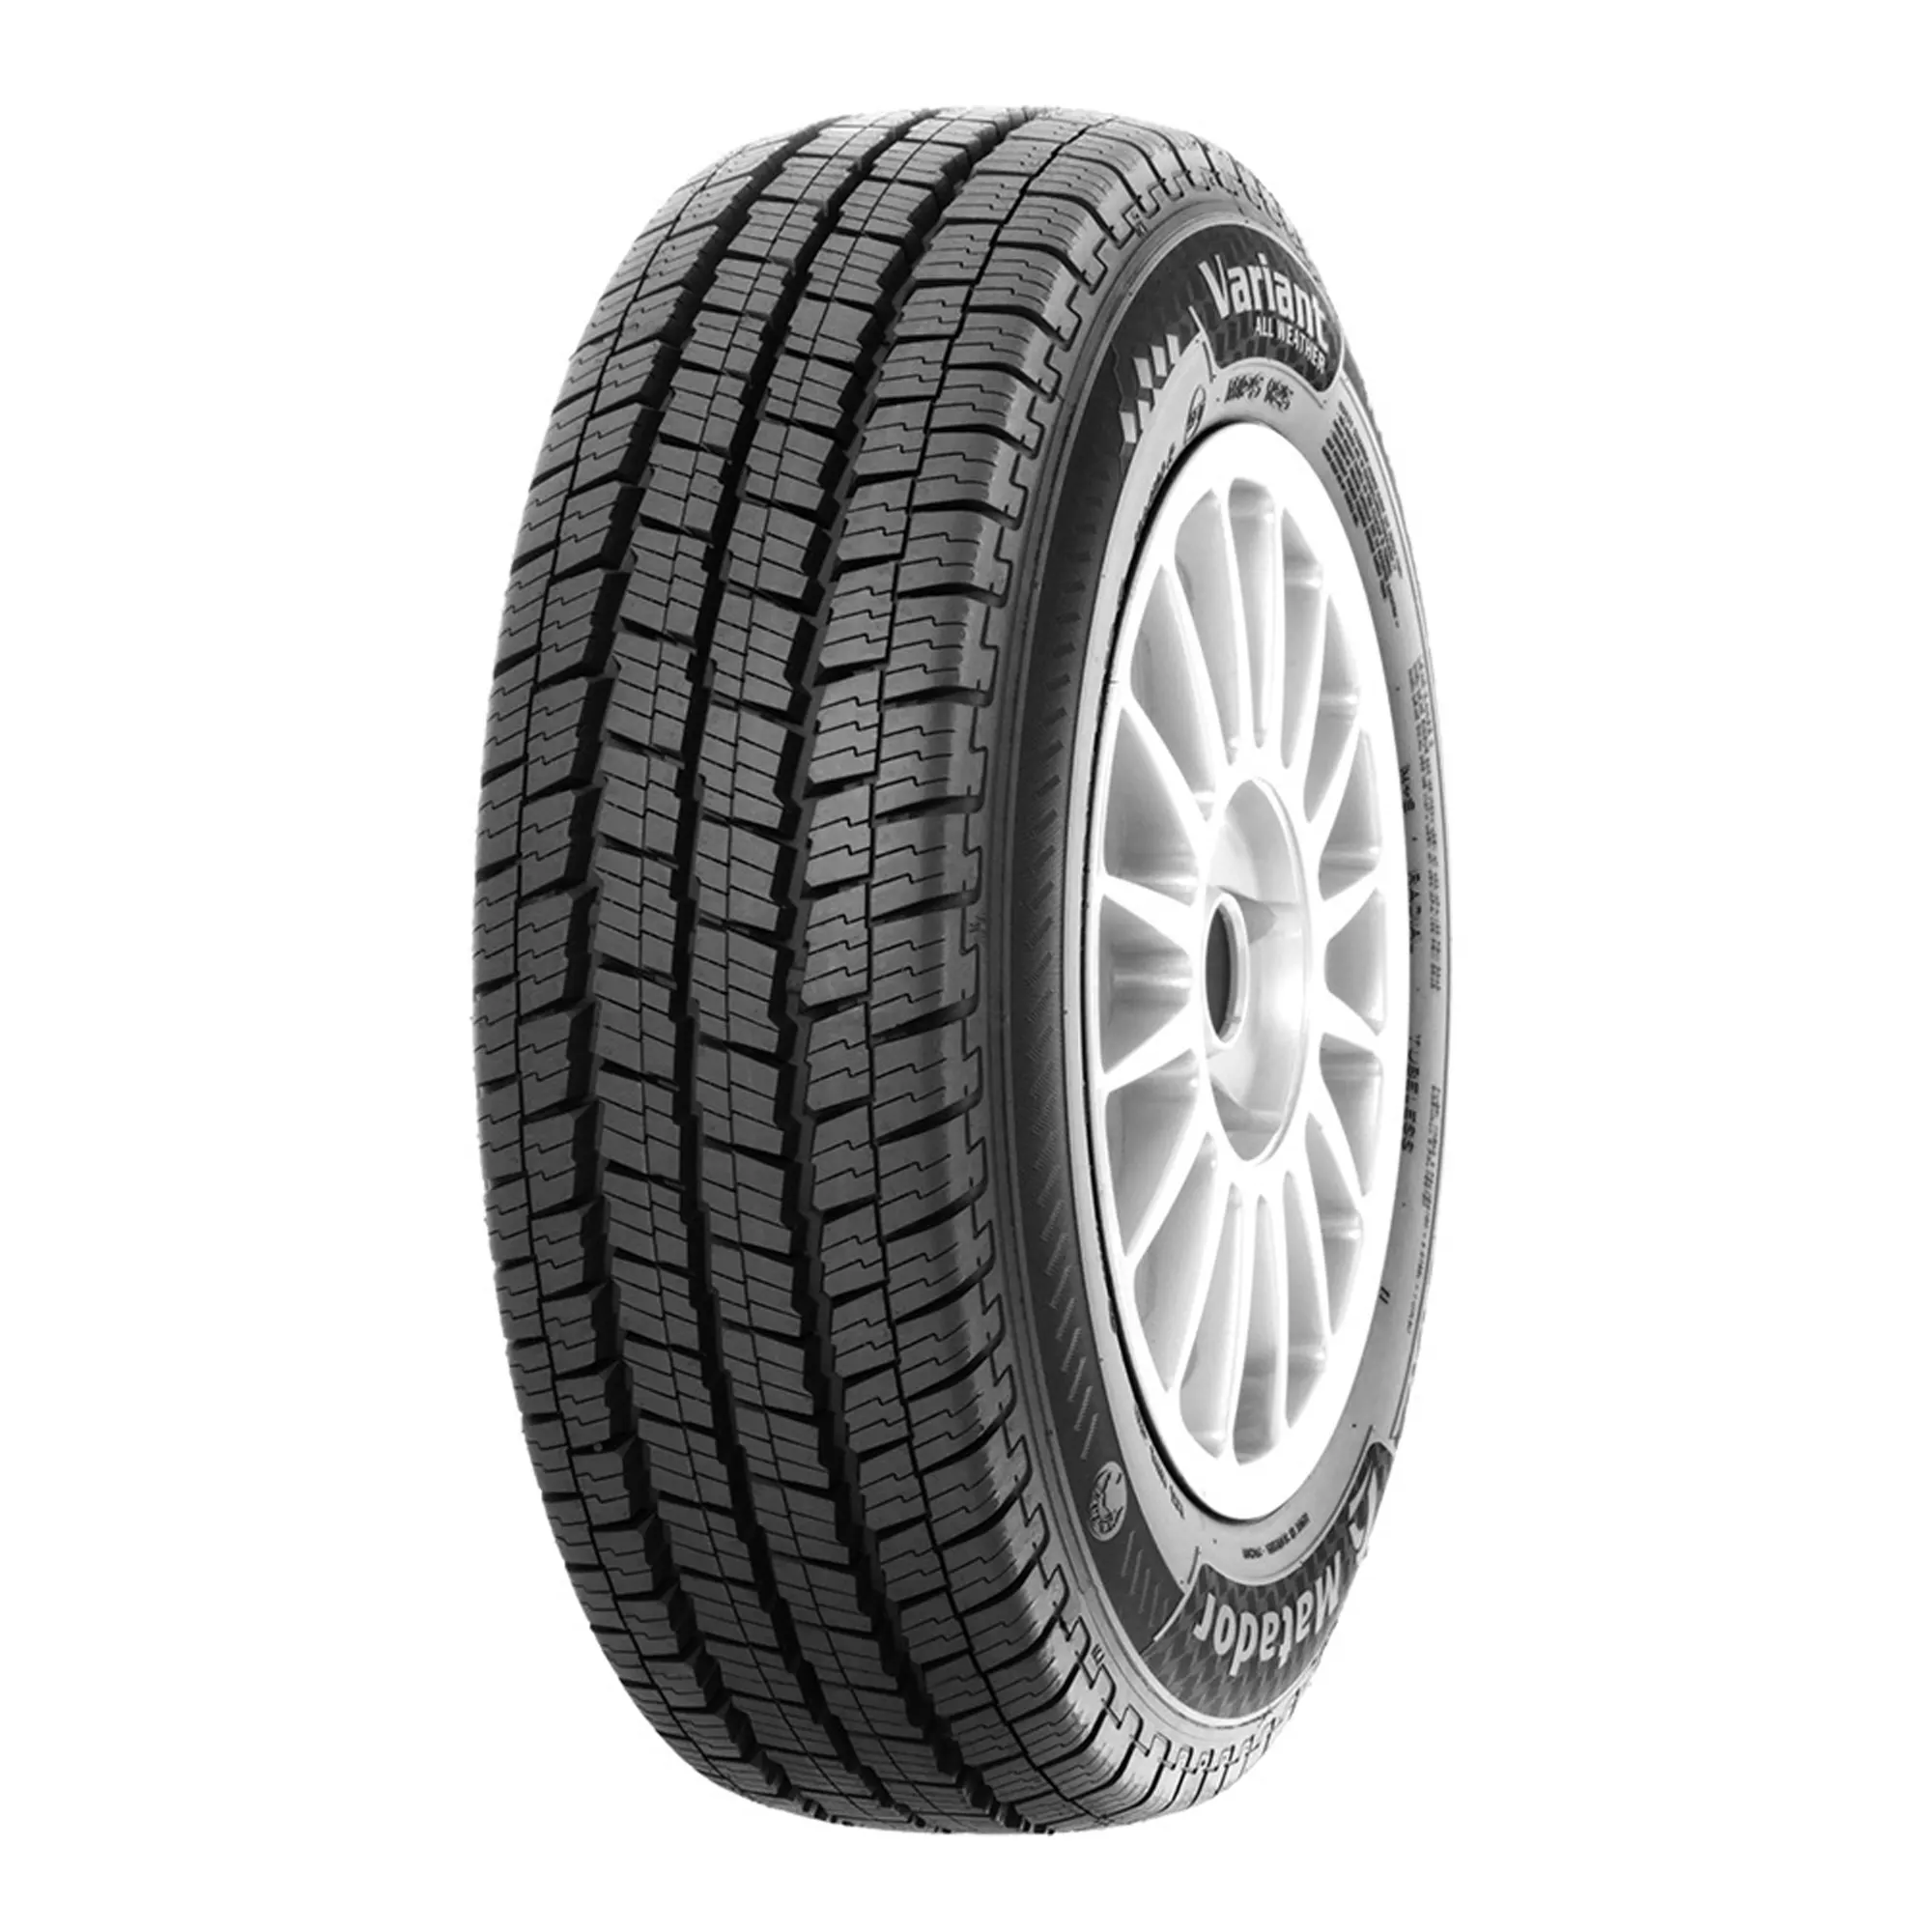 Шина 205/65R15C 102/100T MPS125 VARIANT All Weather